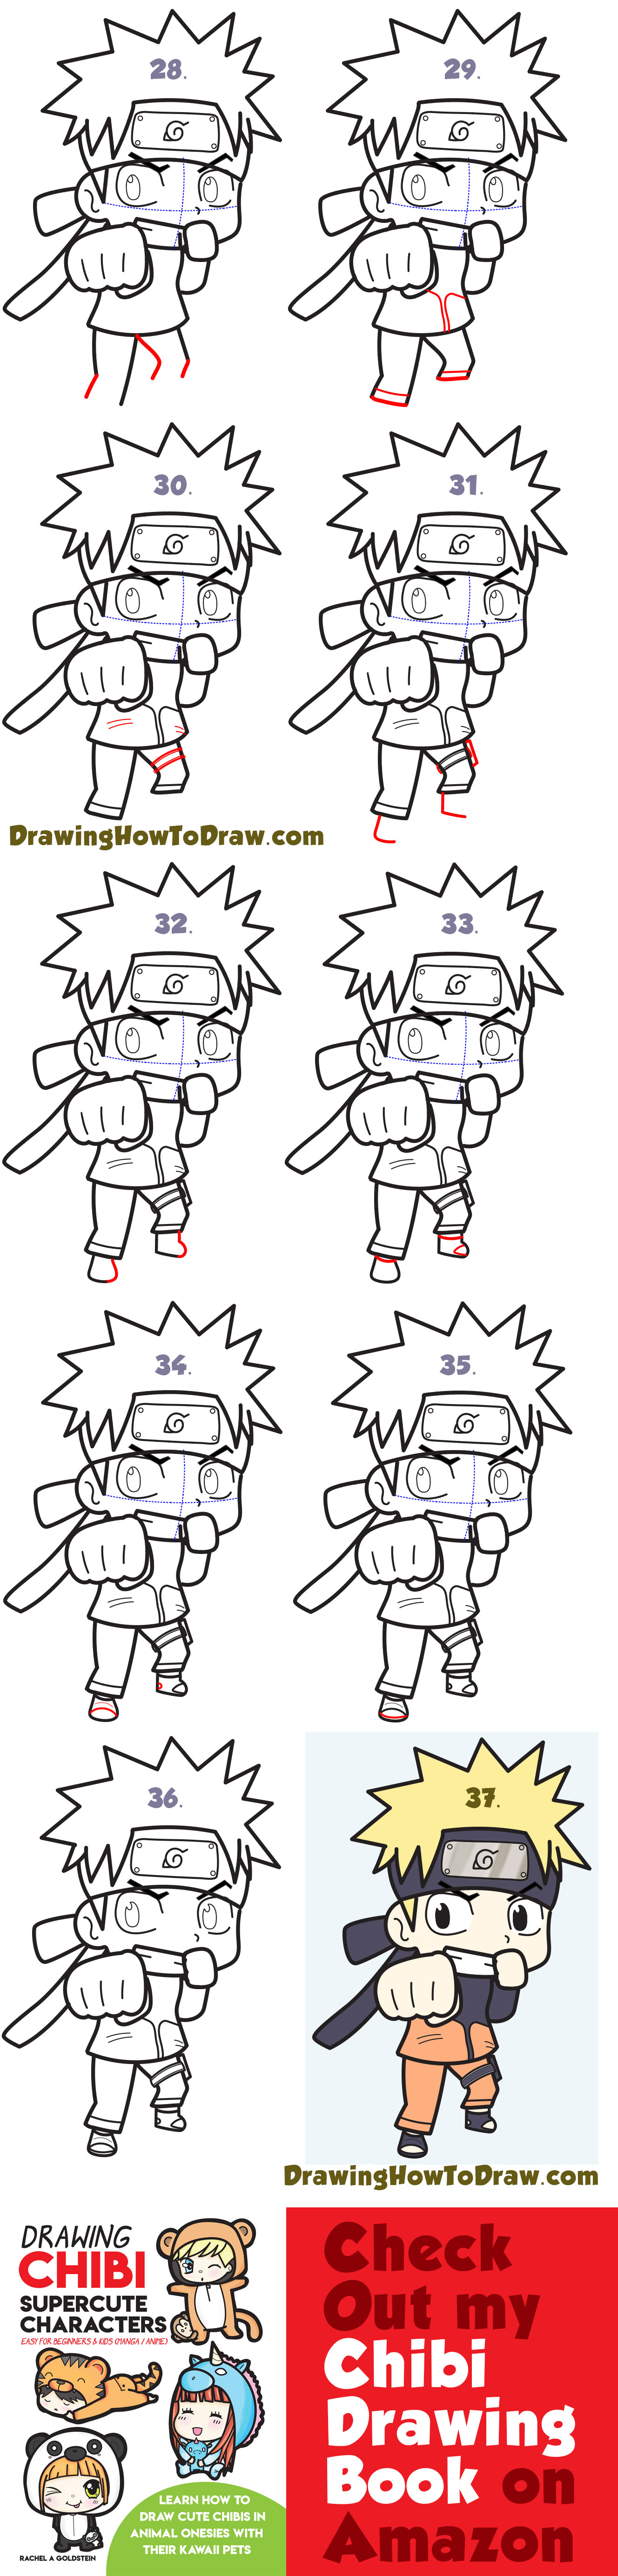 How To Draw Naruto Easy, Step by Step, Drawing Guide, by Dawn